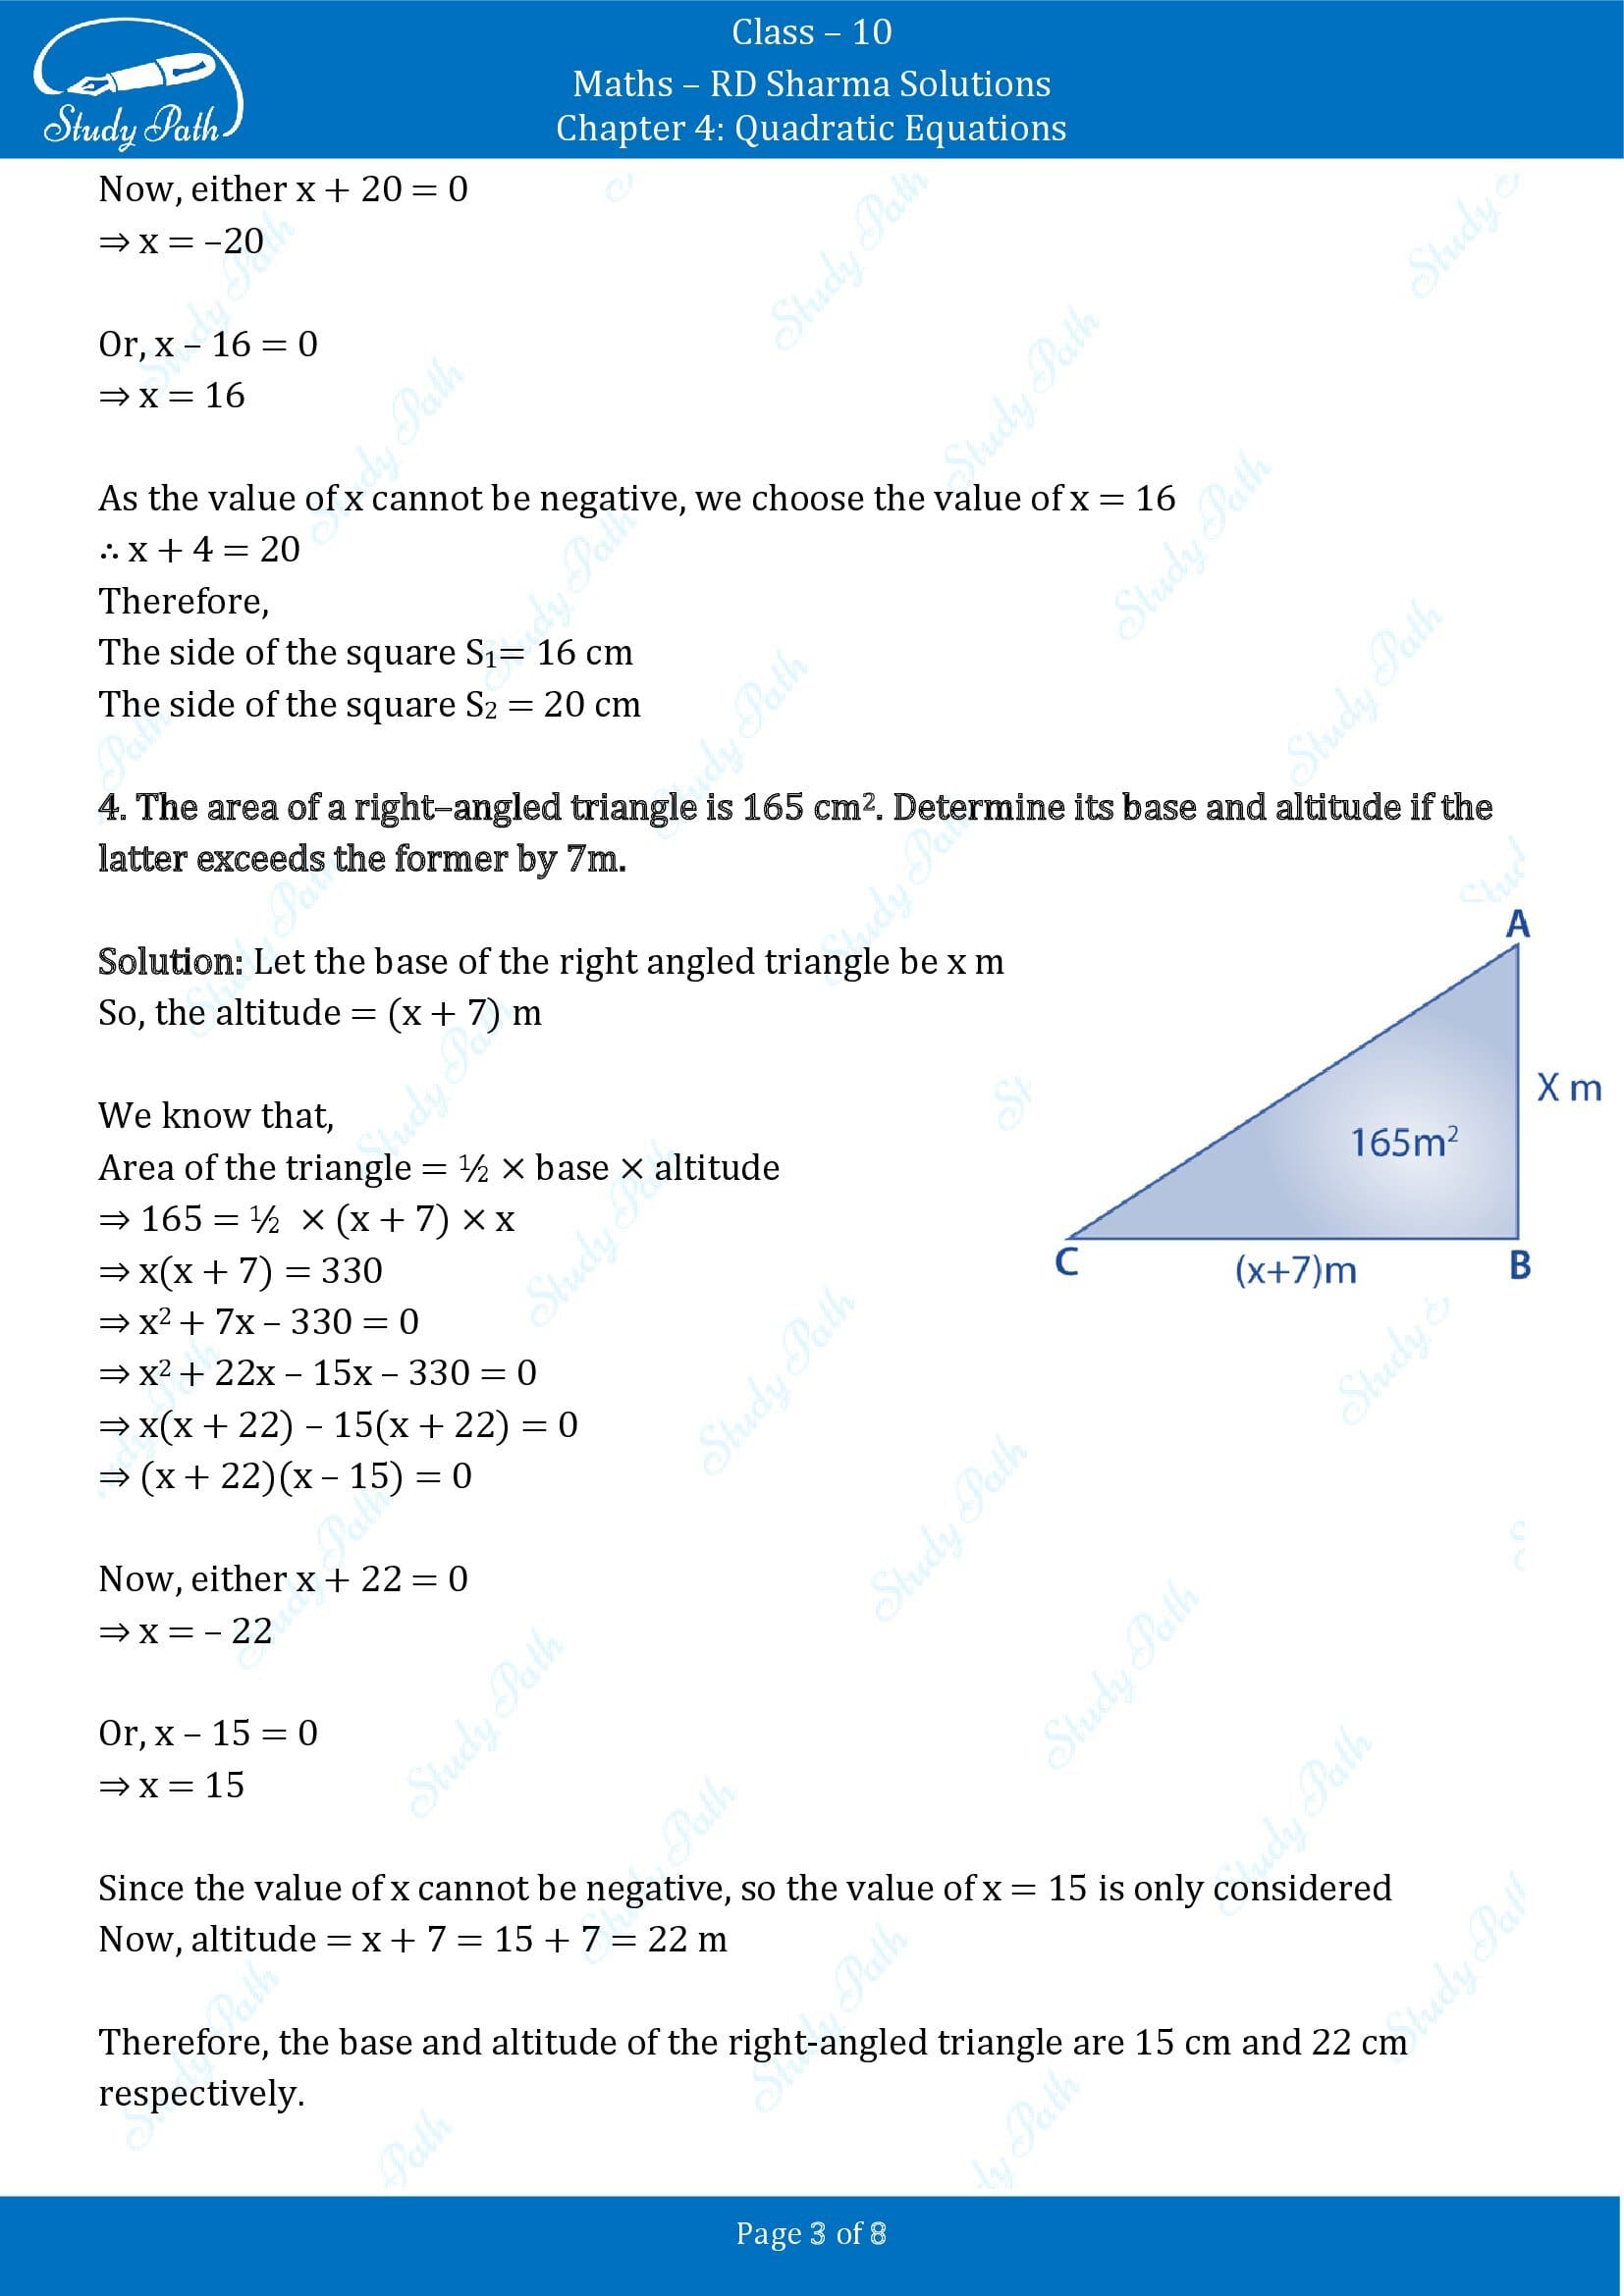 RD Sharma Solutions Class 10 Chapter 4 Quadratic Equations Exercise 4.11 00003